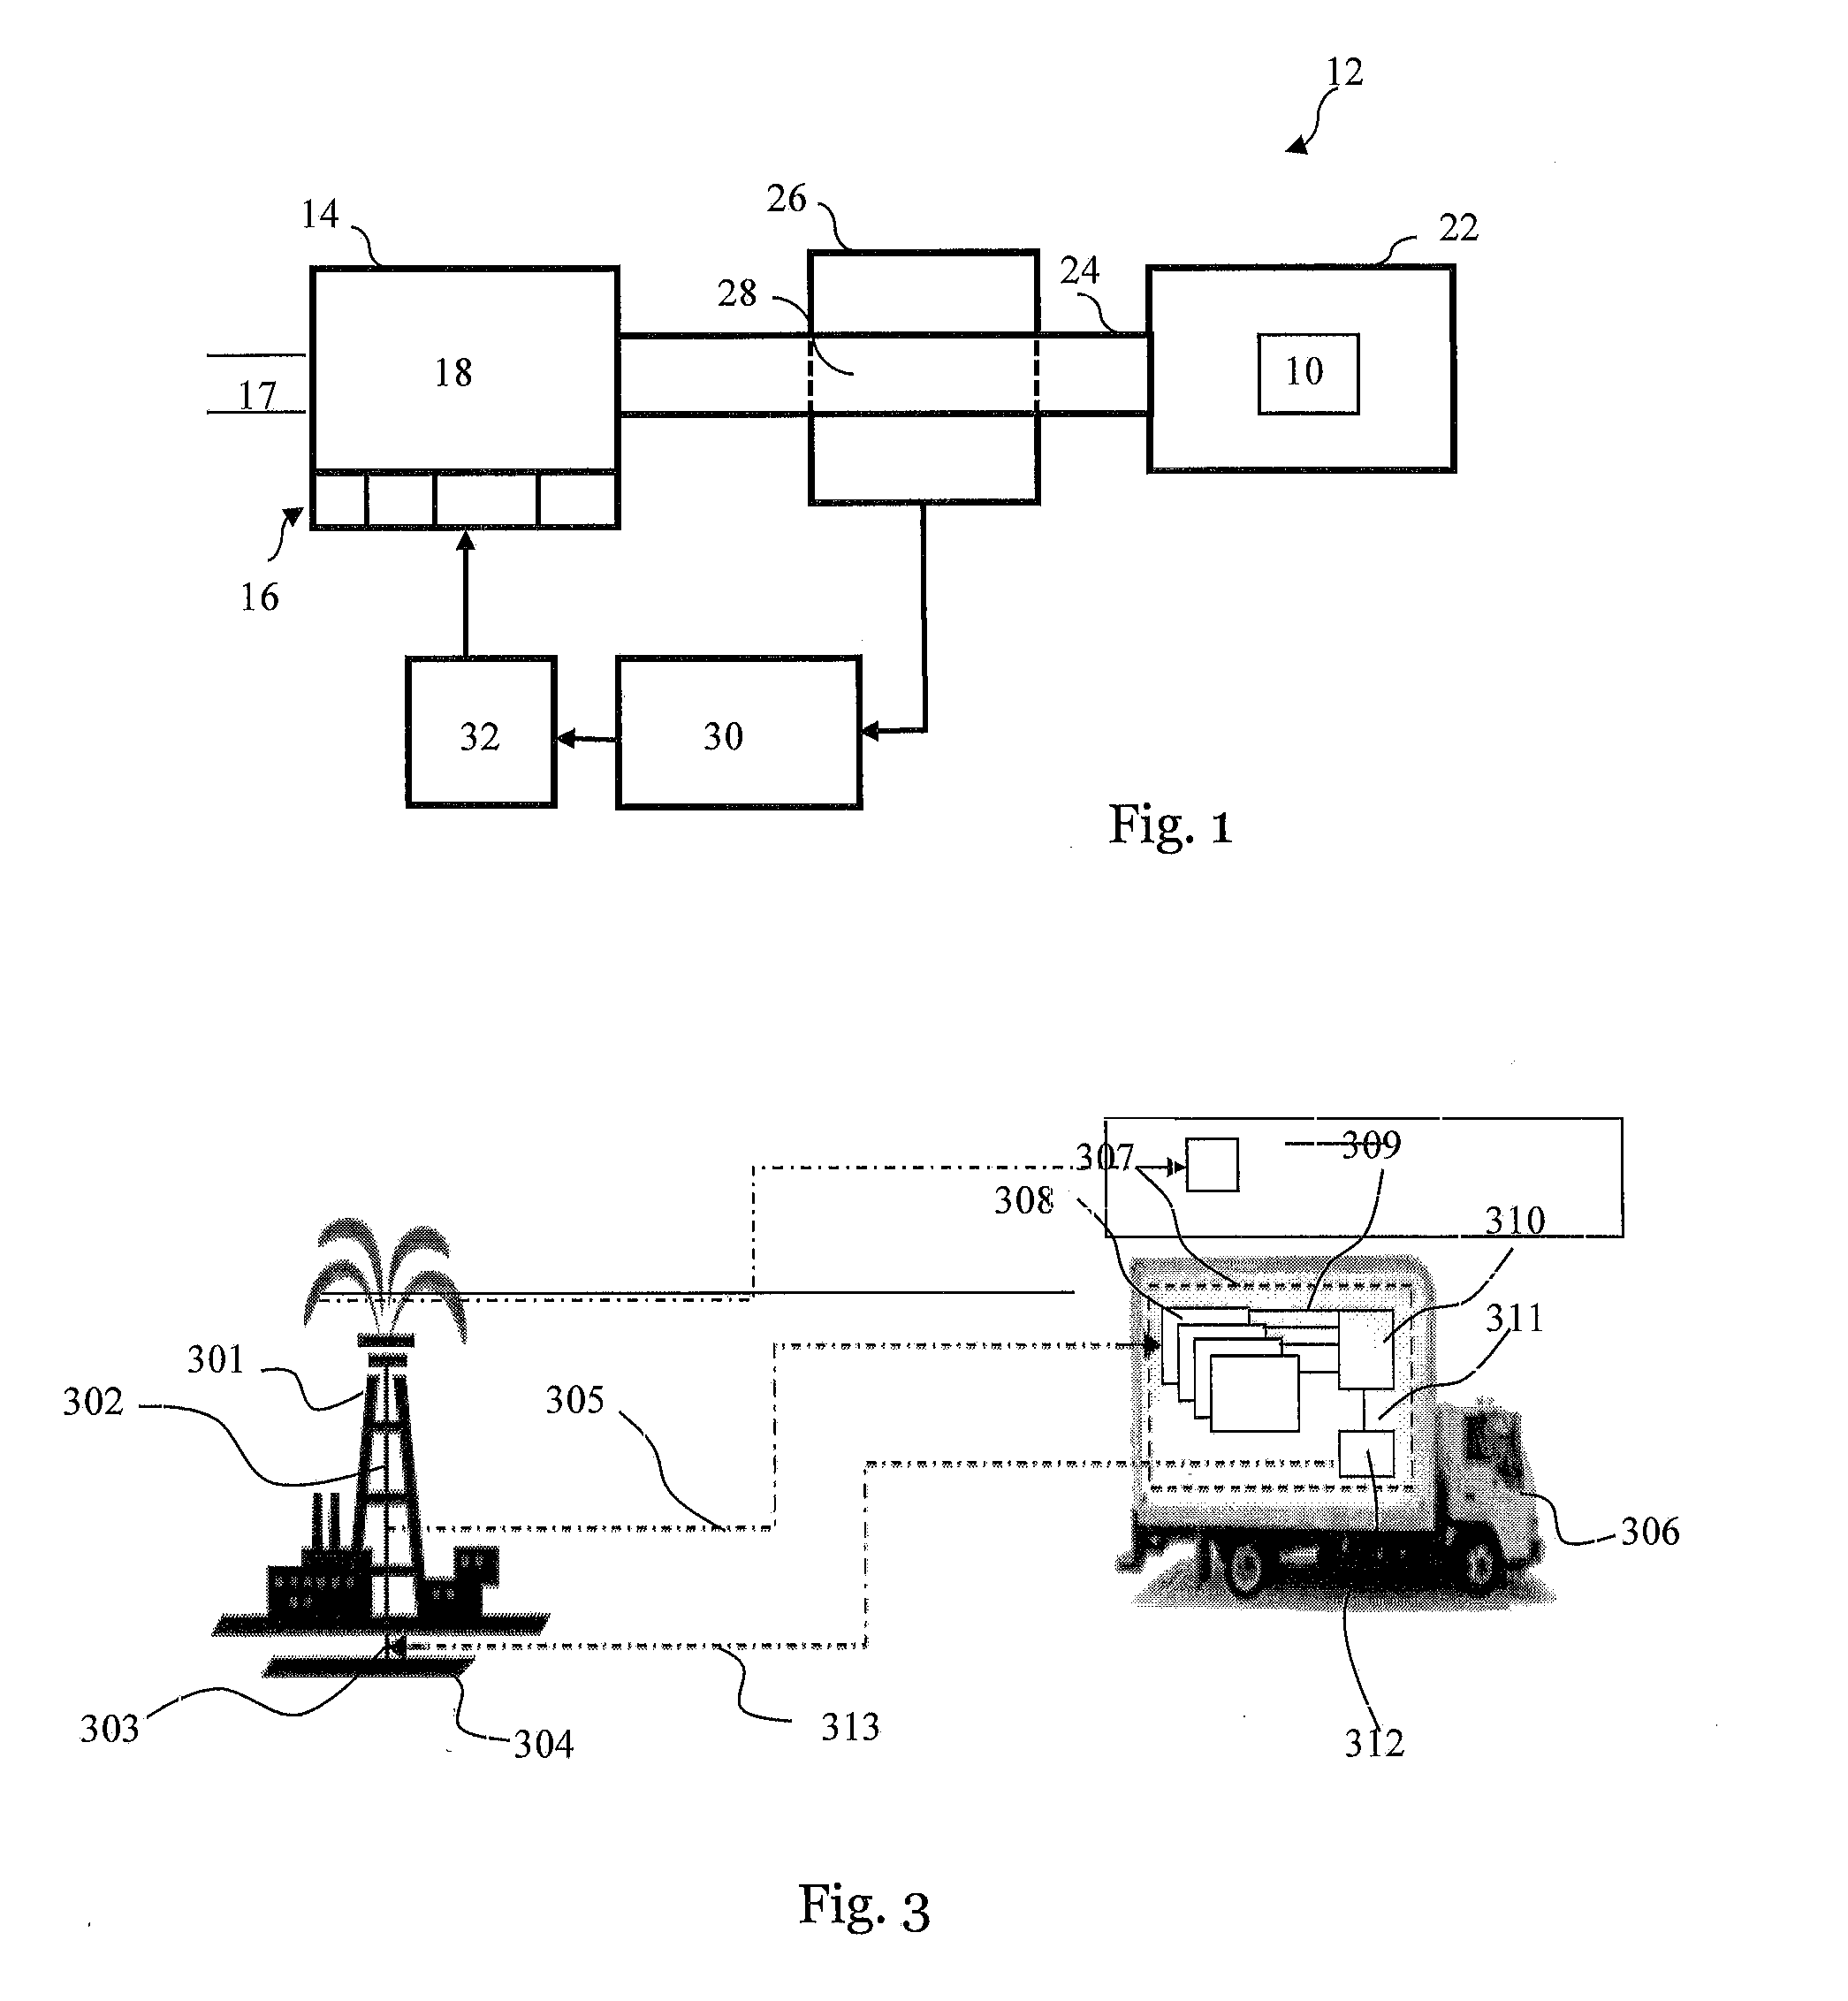 Means and Methods for Multimodality Analysis and Processing of Drilling Mud